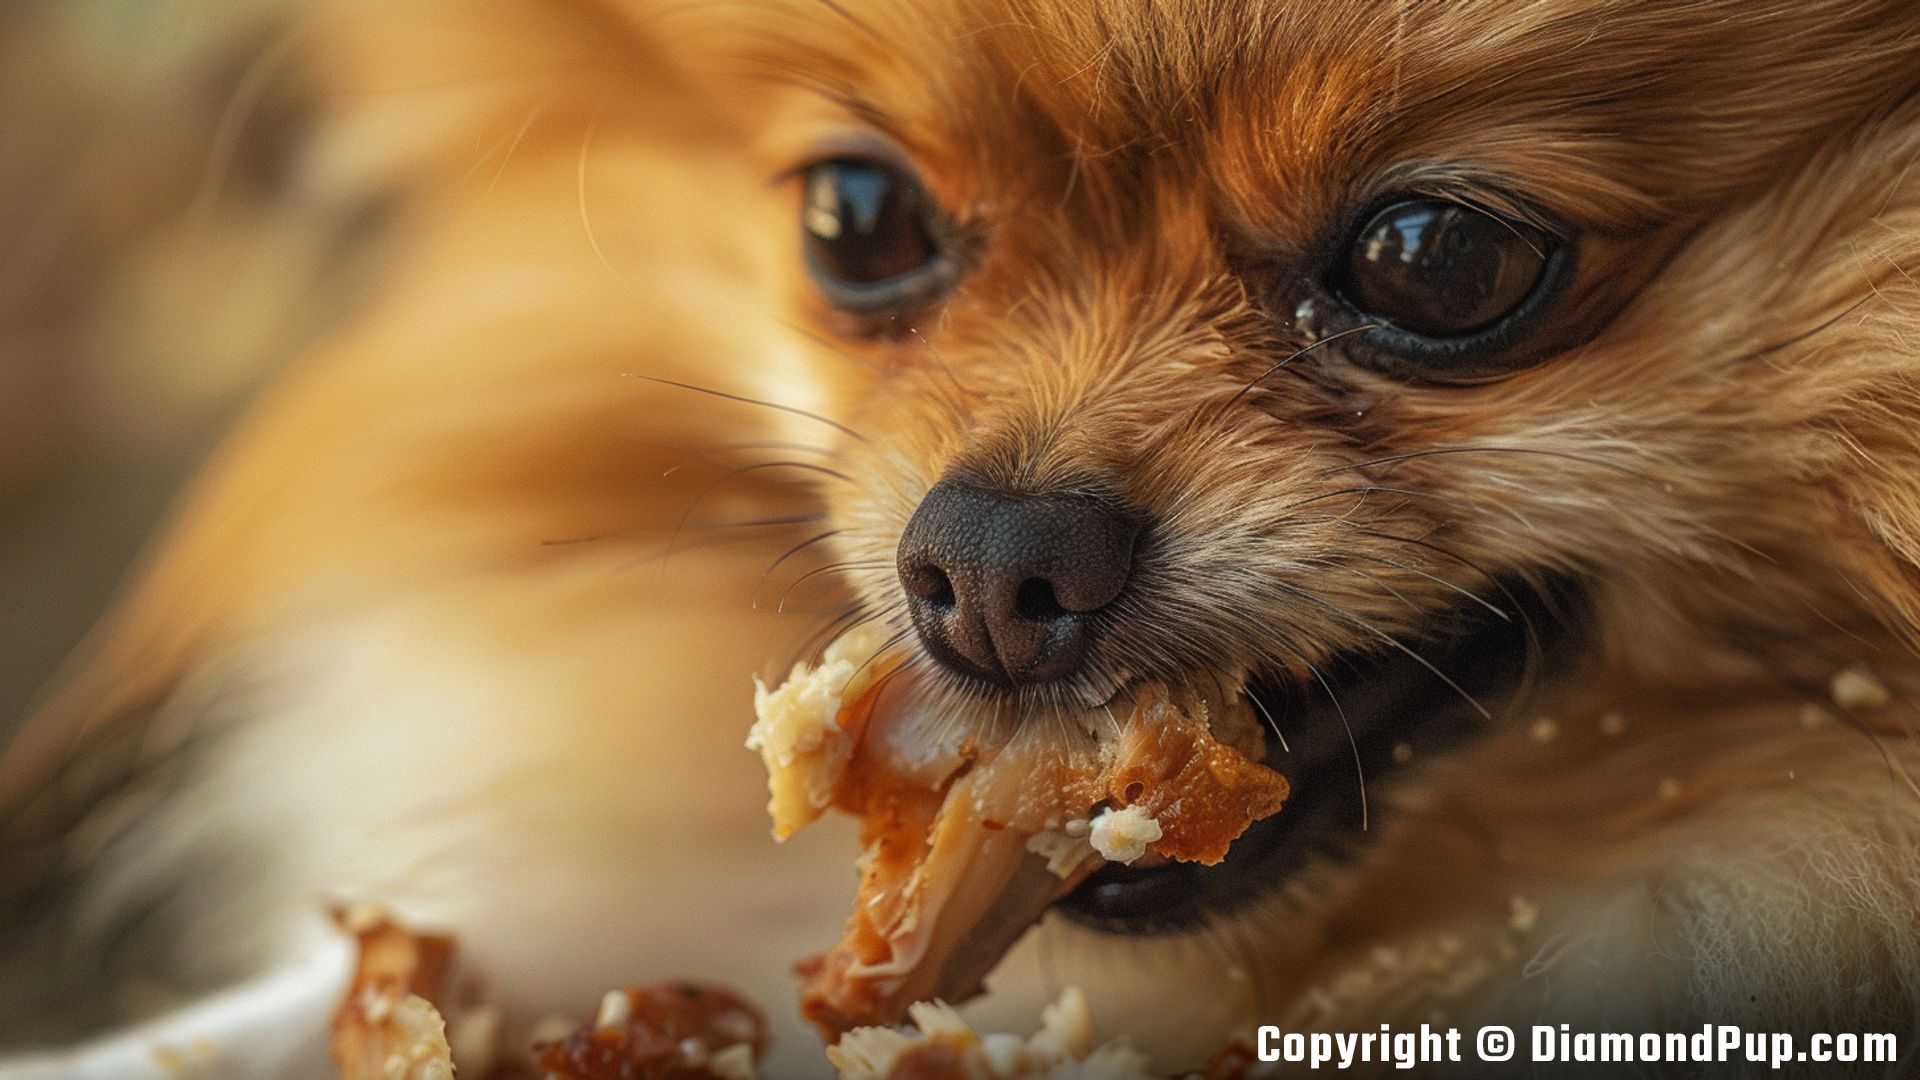 Photograph of a Cute Pomeranian Eating Chicken